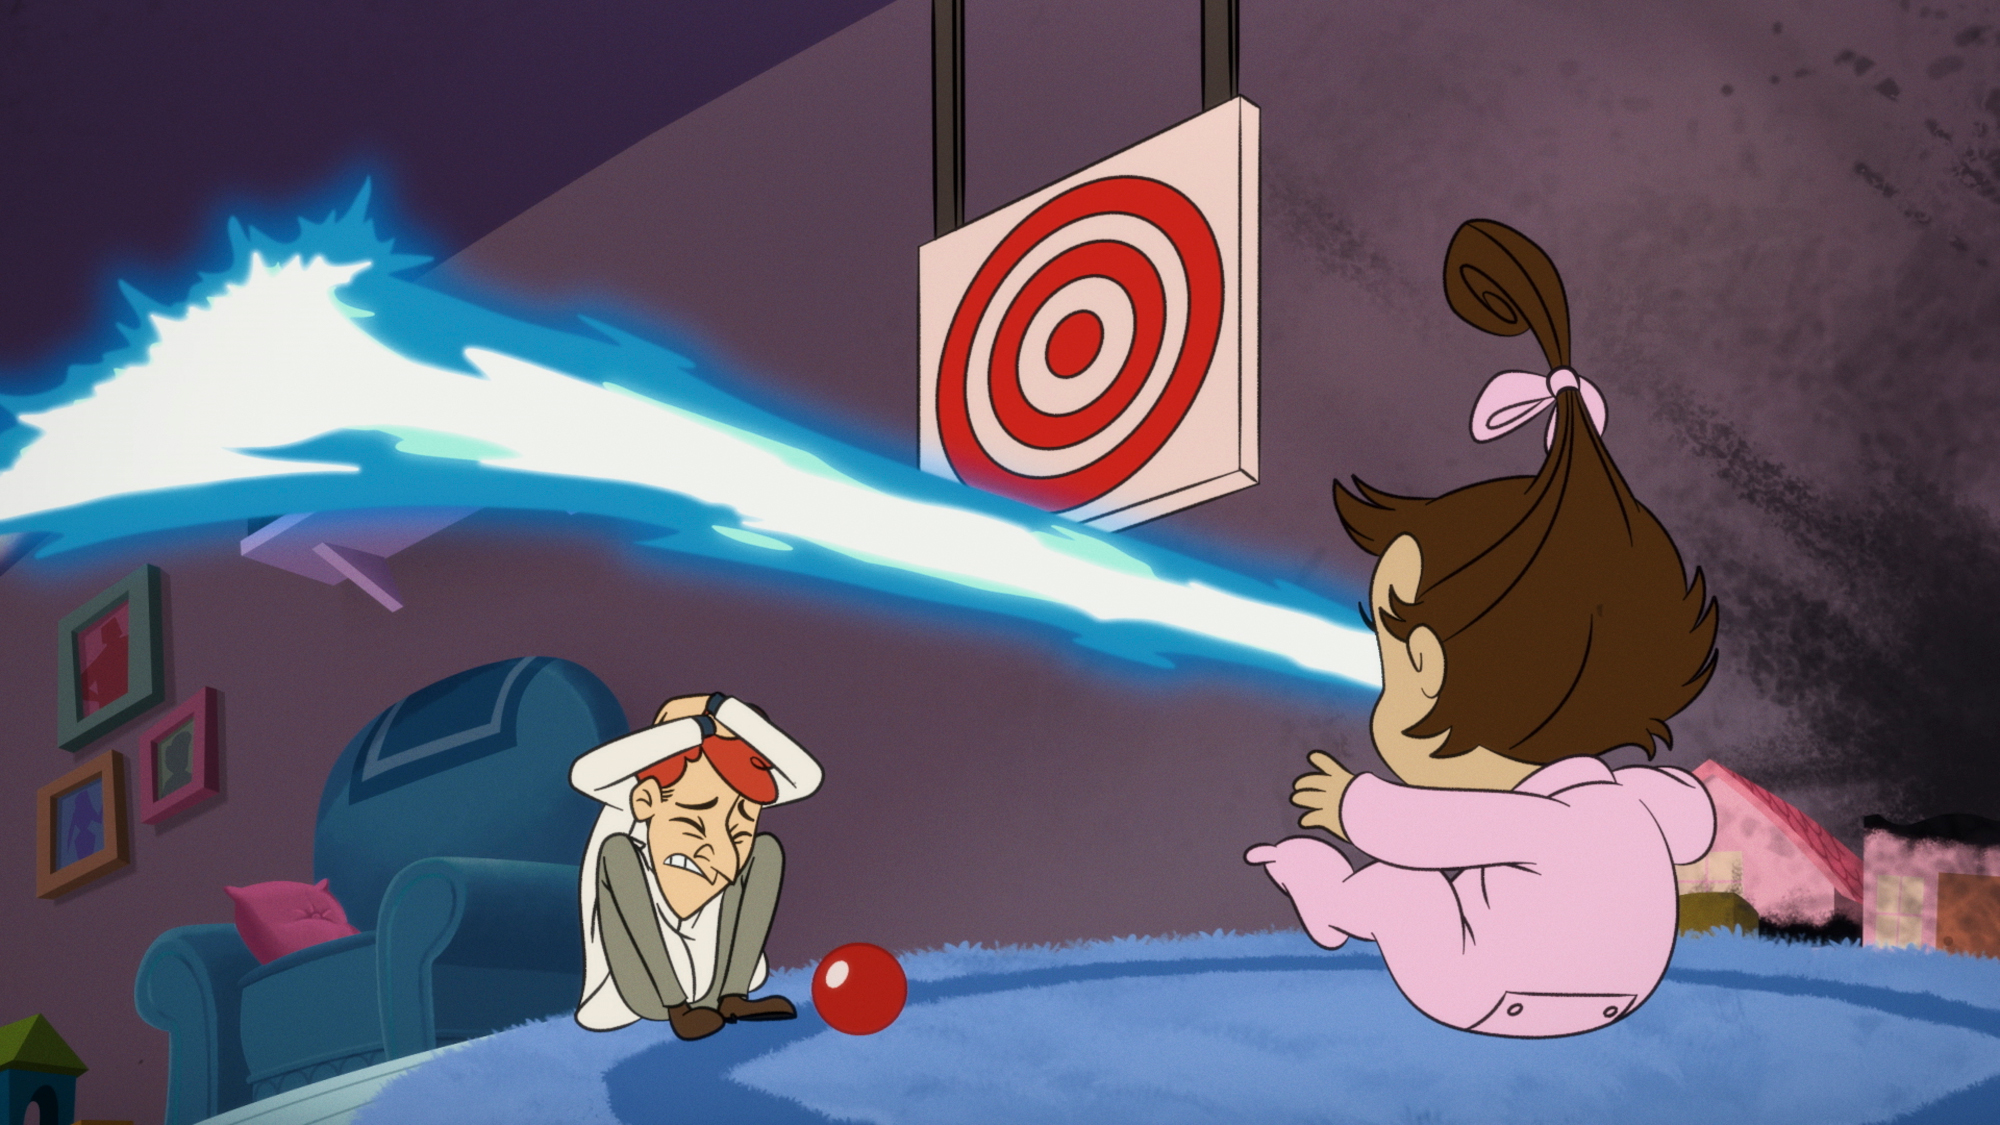 Screenshot of 'The Boys Presents: Diabolical' Episode 1, which shows Laser Baby shooting lasers out of her eyes.